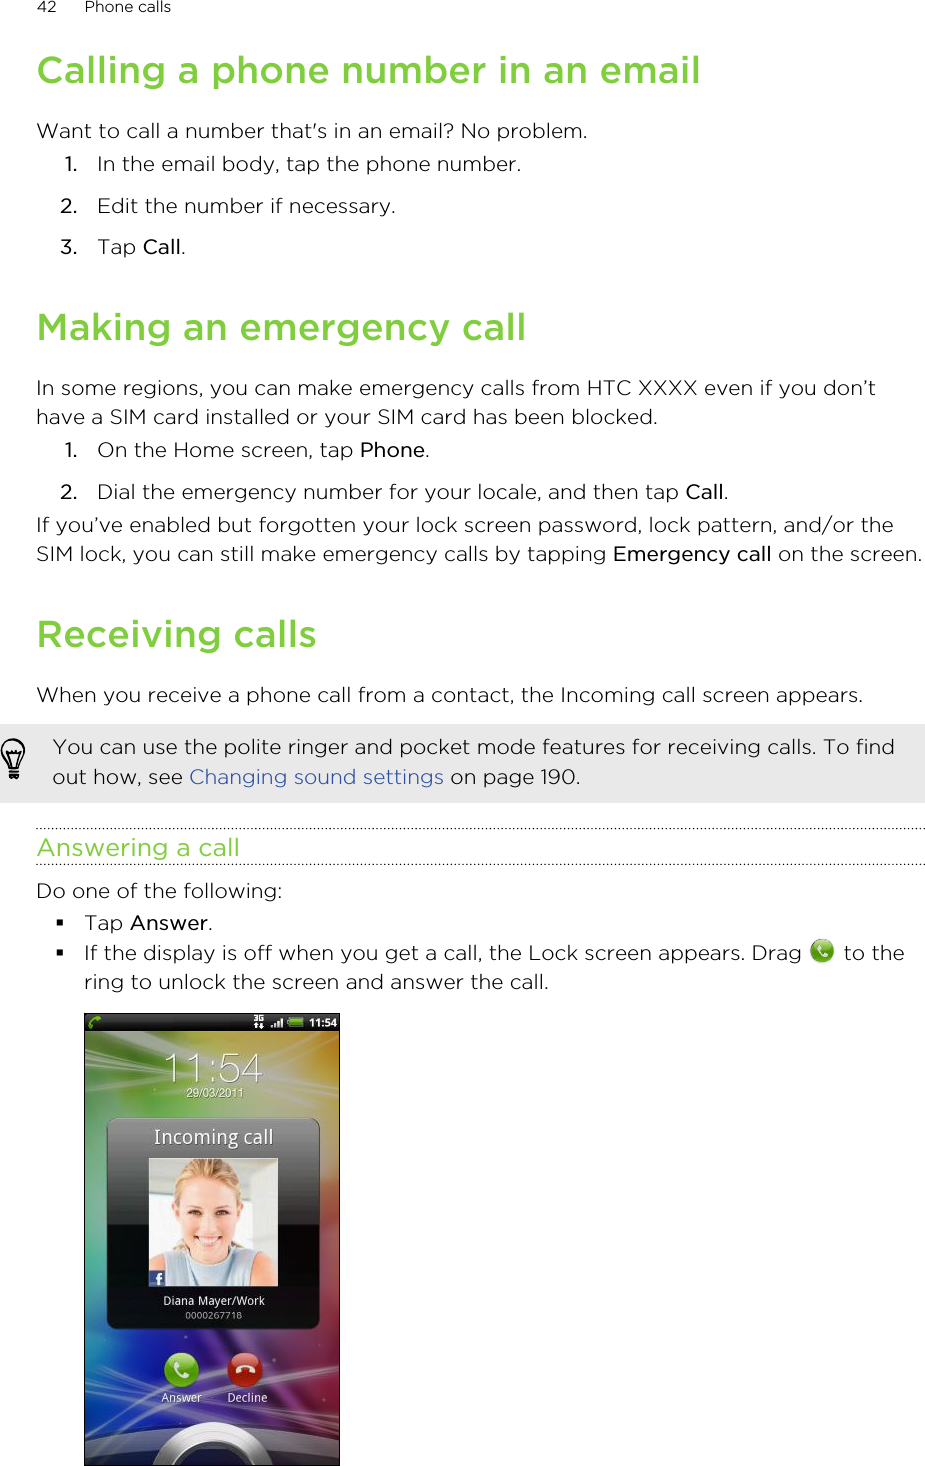 Calling a phone number in an emailWant to call a number that&apos;s in an email? No problem.1. In the email body, tap the phone number.2. Edit the number if necessary.3. Tap Call.Making an emergency callIn some regions, you can make emergency calls from HTC XXXX even if you don’thave a SIM card installed or your SIM card has been blocked.1. On the Home screen, tap Phone.2. Dial the emergency number for your locale, and then tap Call.If you’ve enabled but forgotten your lock screen password, lock pattern, and/or theSIM lock, you can still make emergency calls by tapping Emergency call on the screen.Receiving callsWhen you receive a phone call from a contact, the Incoming call screen appears.You can use the polite ringer and pocket mode features for receiving calls. To findout how, see Changing sound settings on page 190.Answering a callDo one of the following:§Tap Answer.§If the display is off when you get a call, the Lock screen appears. Drag   to thering to unlock the screen and answer the call.42 Phone calls